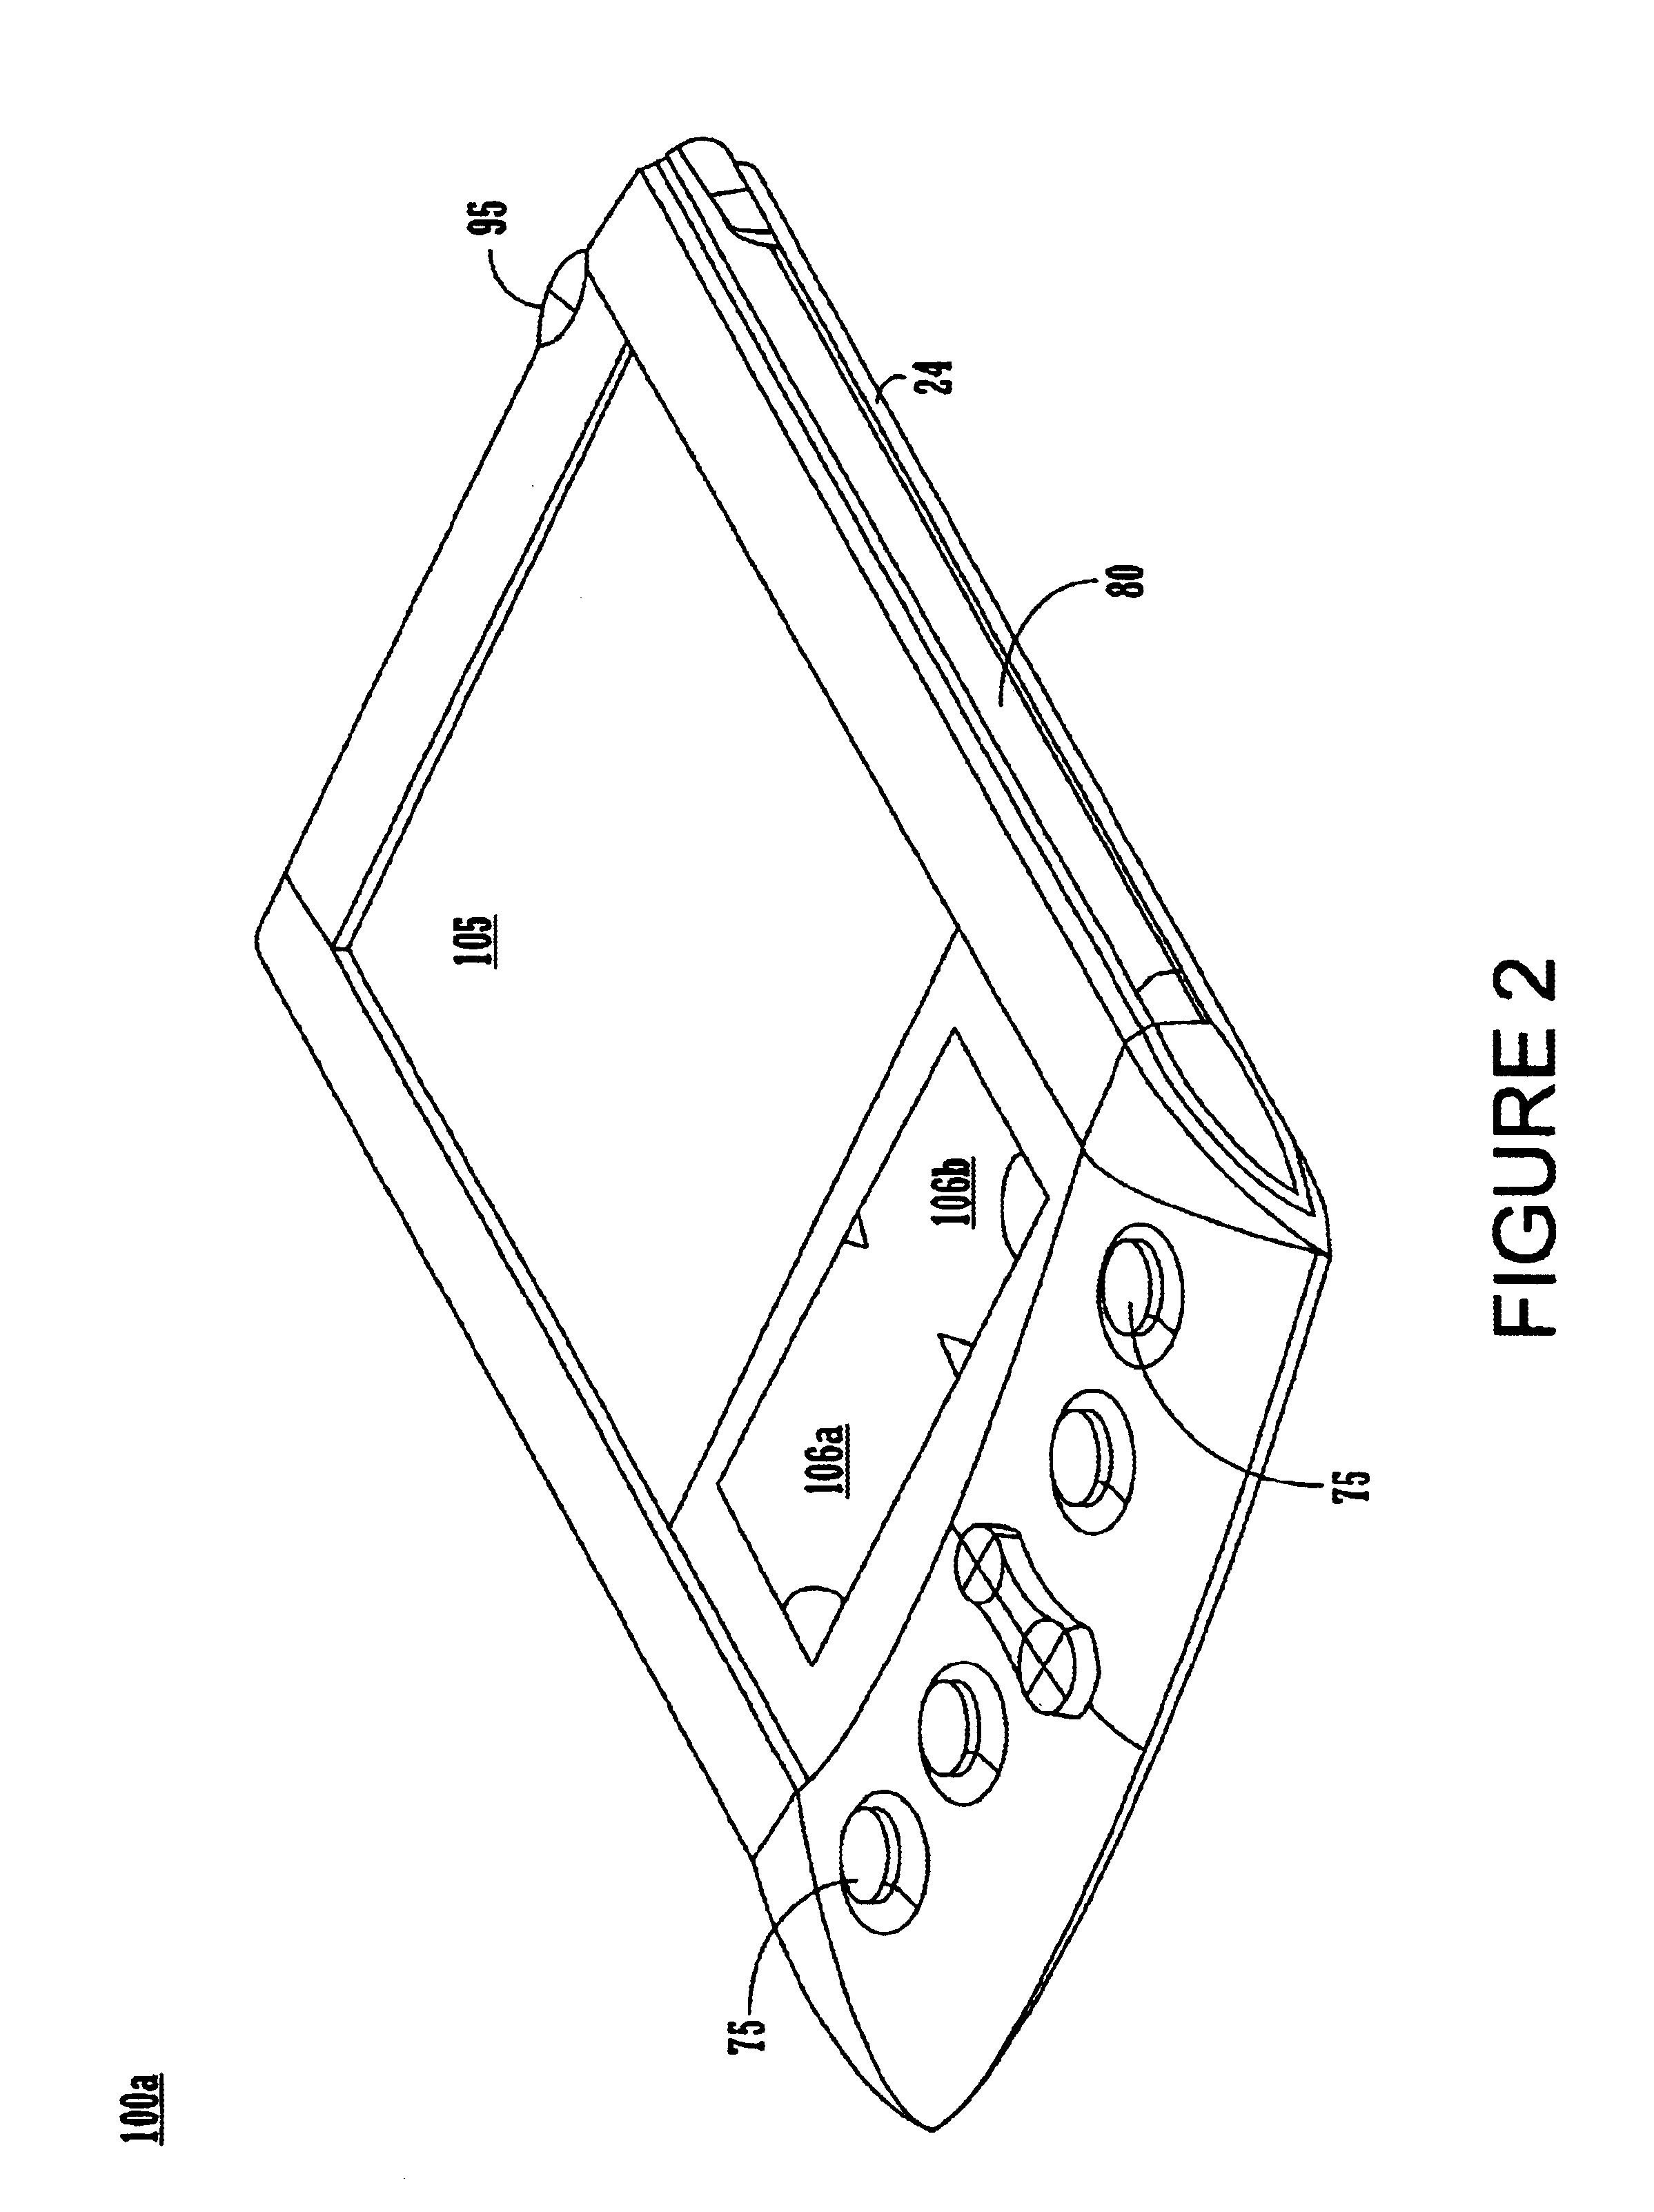 Multifunctional cover integrated into sub-panel of portable electronic device